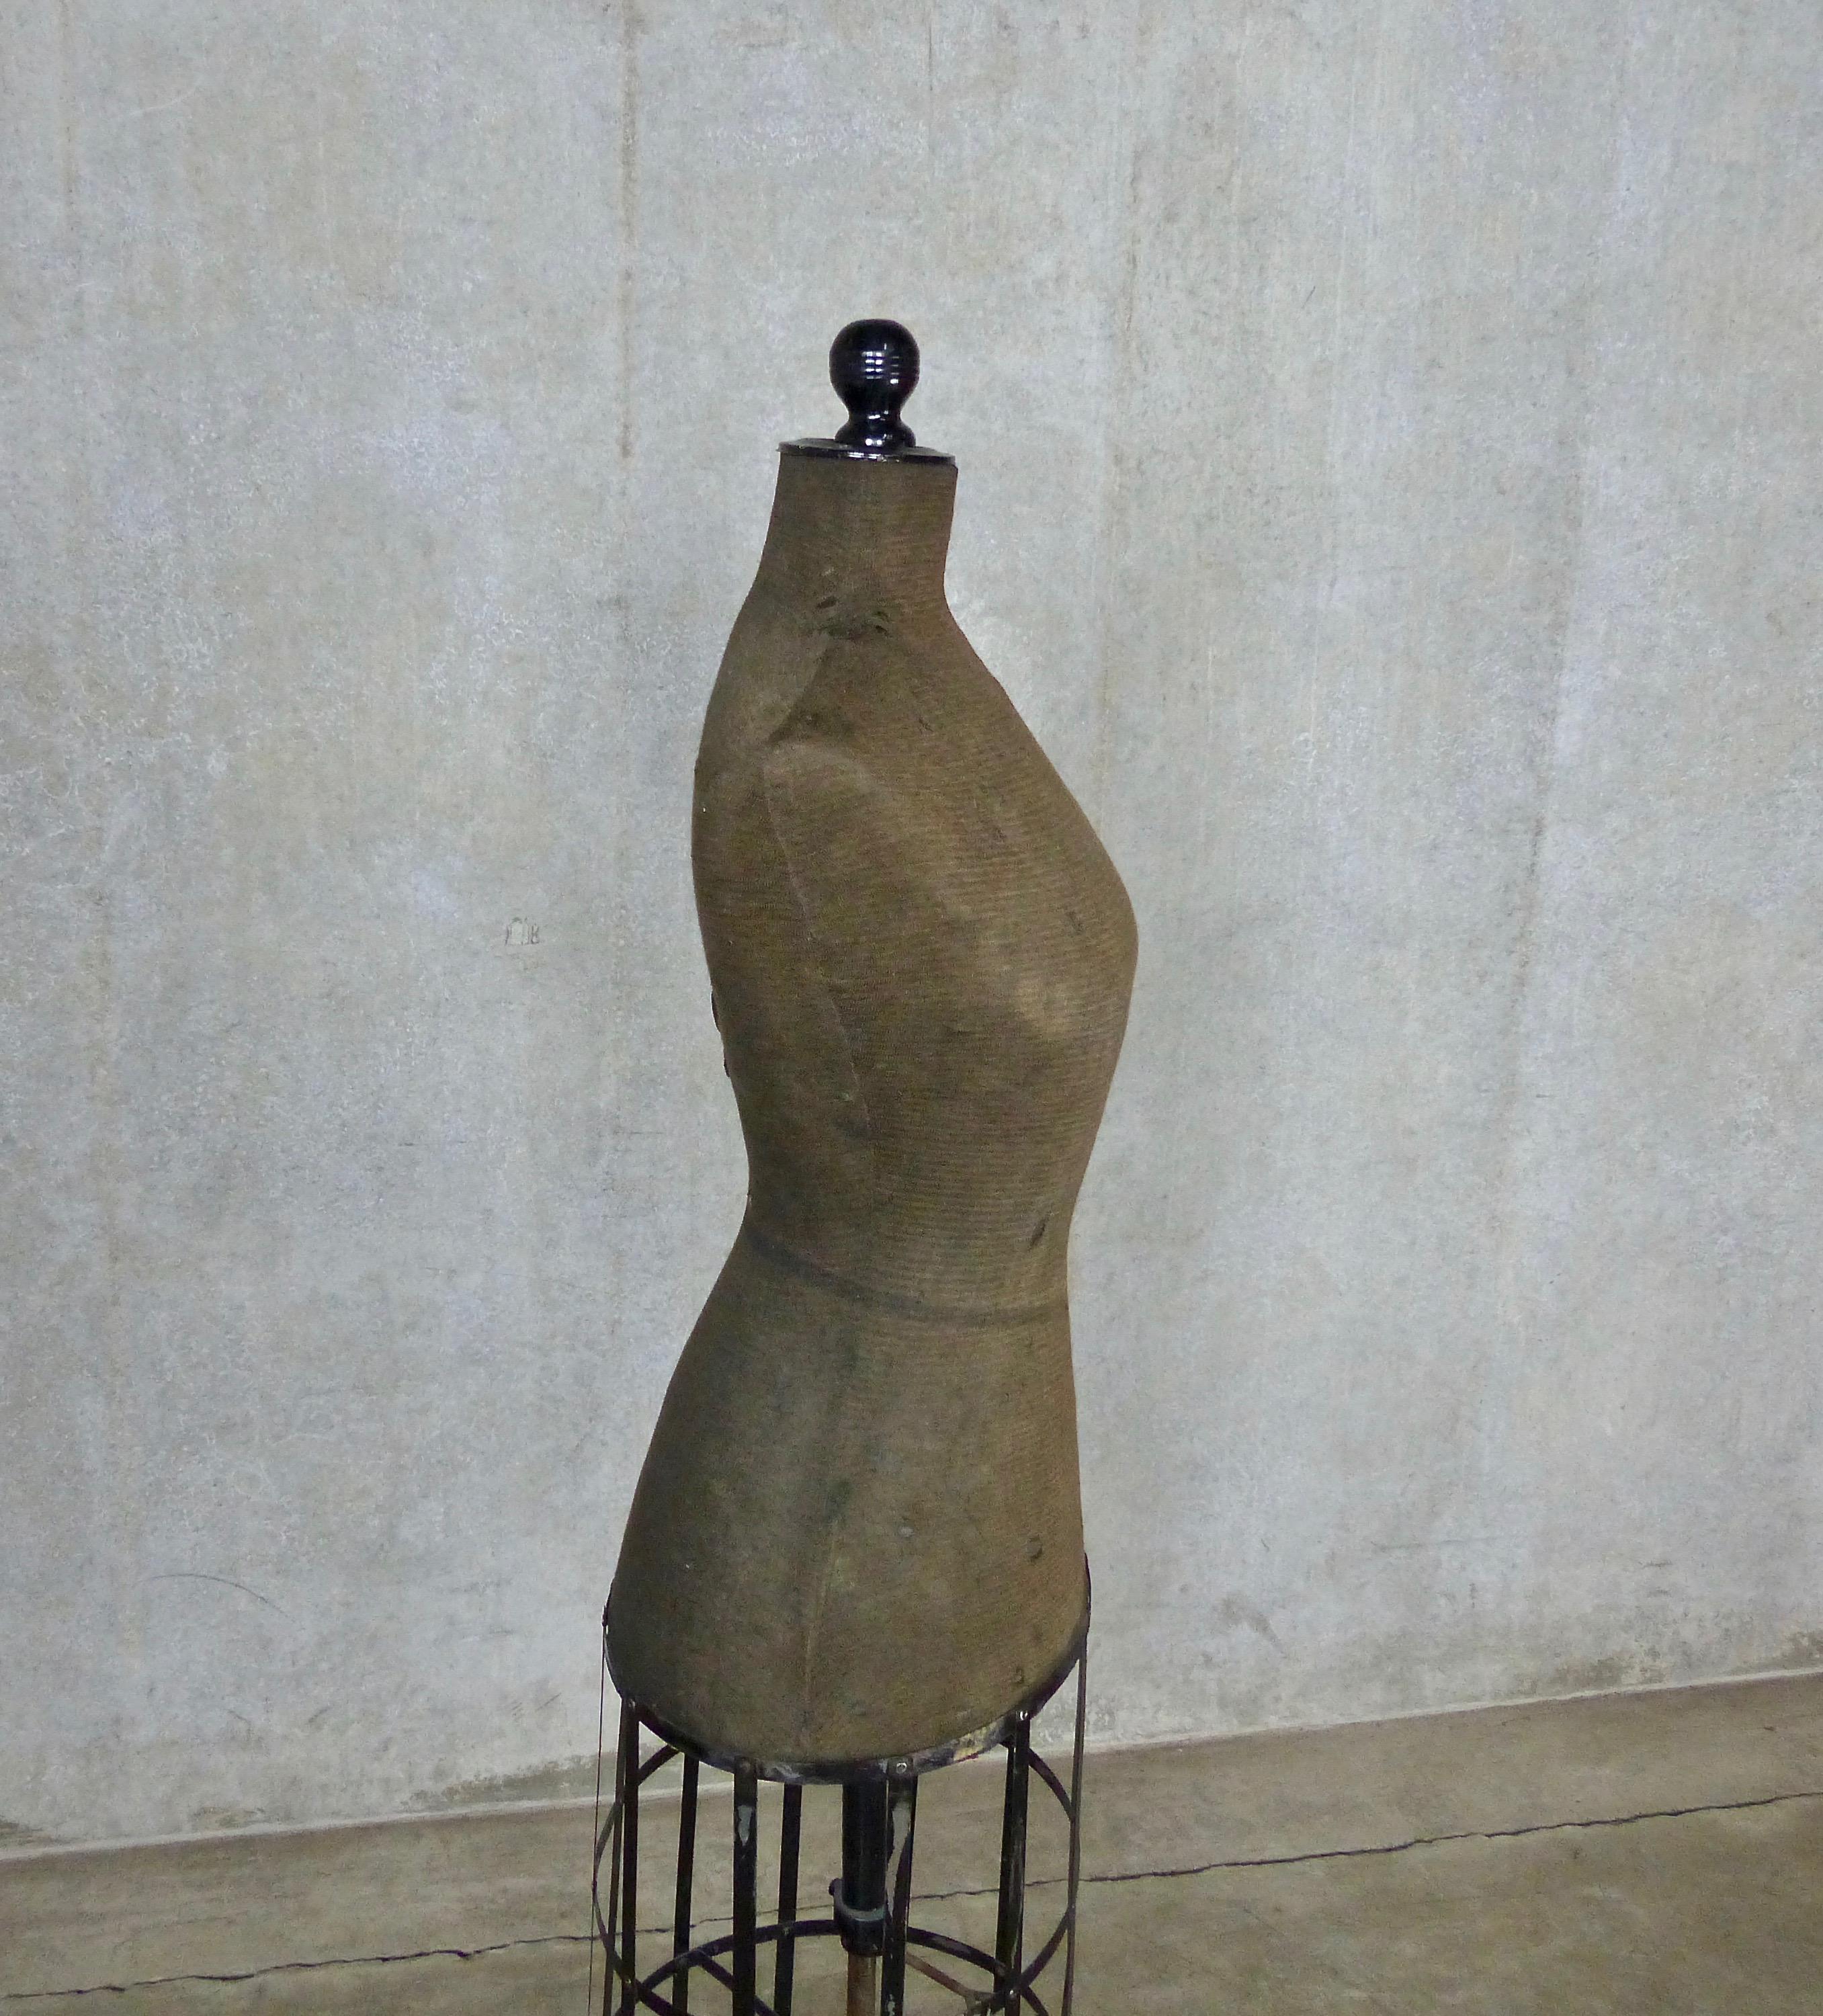 Lovely freestanding mannequin/dress form from the early 1900s. Features a sturdy cast iron base and adjustable metal cage. Great condition for its age. And features a wasp waist of only 22 inches!
Dimensions: 58 H” x 14 W” x 11 D”.